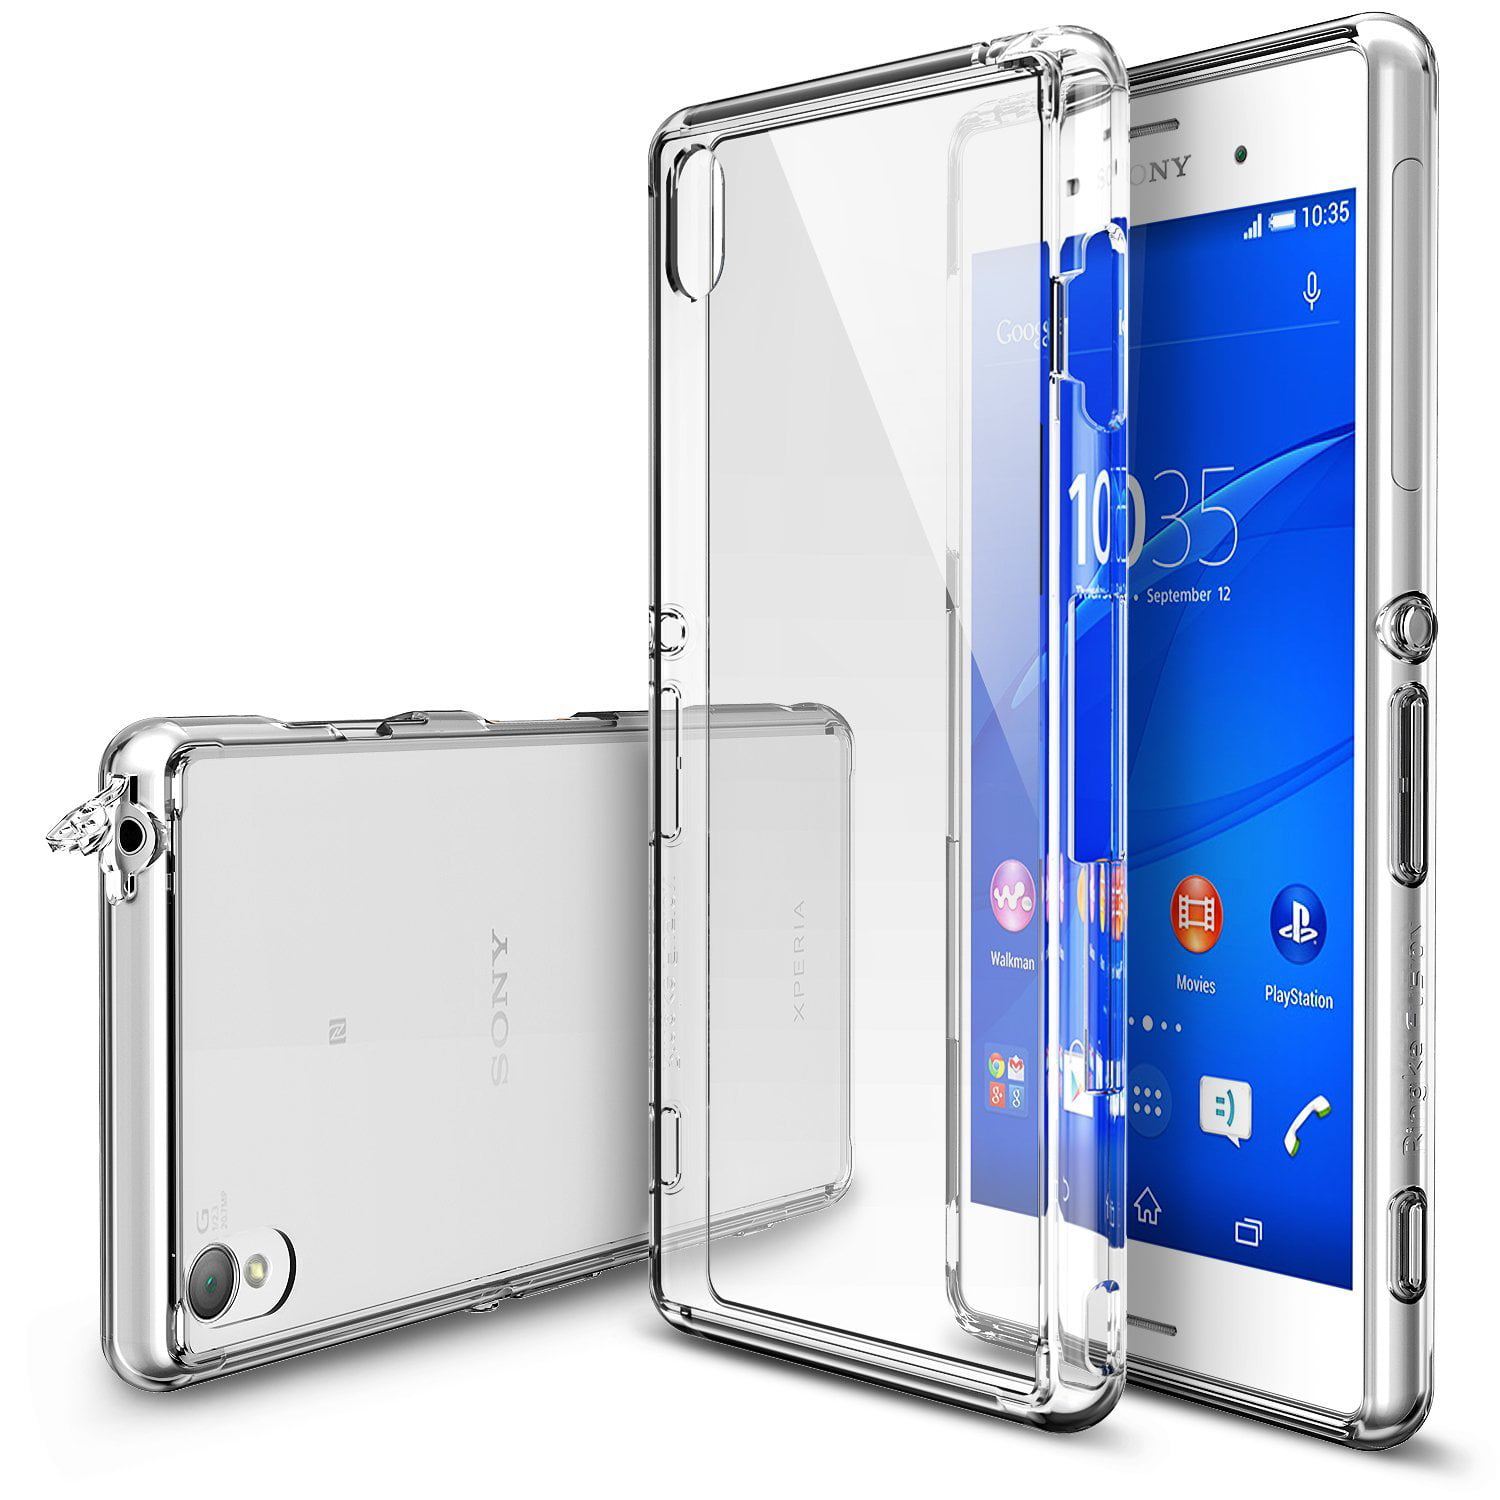 Retoucheren Buitenlander Hedendaags Ringke Fusion Case Compatible with Sony Xperia Z3, Transparent PC Back TPU  Bumper Drop Protection Phone Cover - Clear - Walmart.com